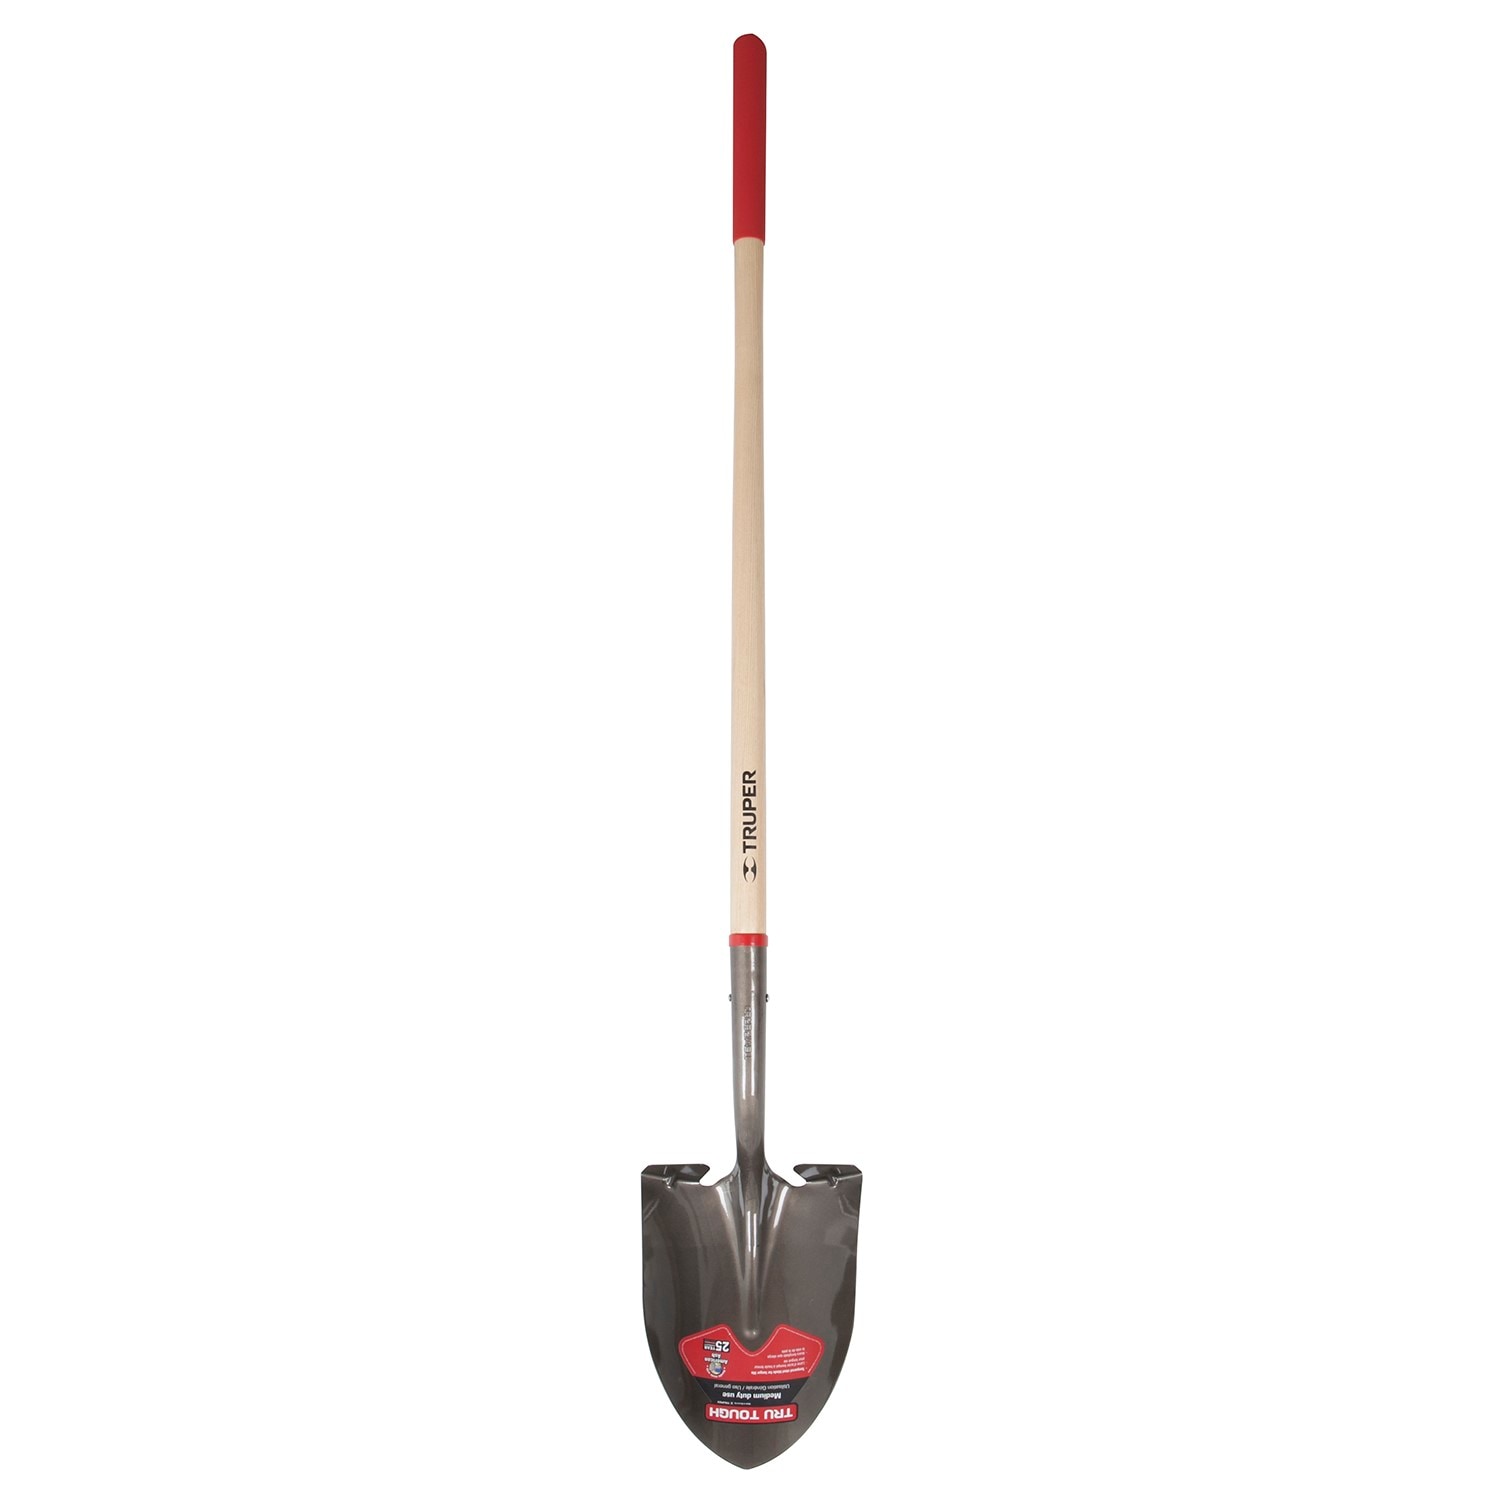 1 x Neilsen Strong Builders Shovel with wooden handle Free delivery CT0091 